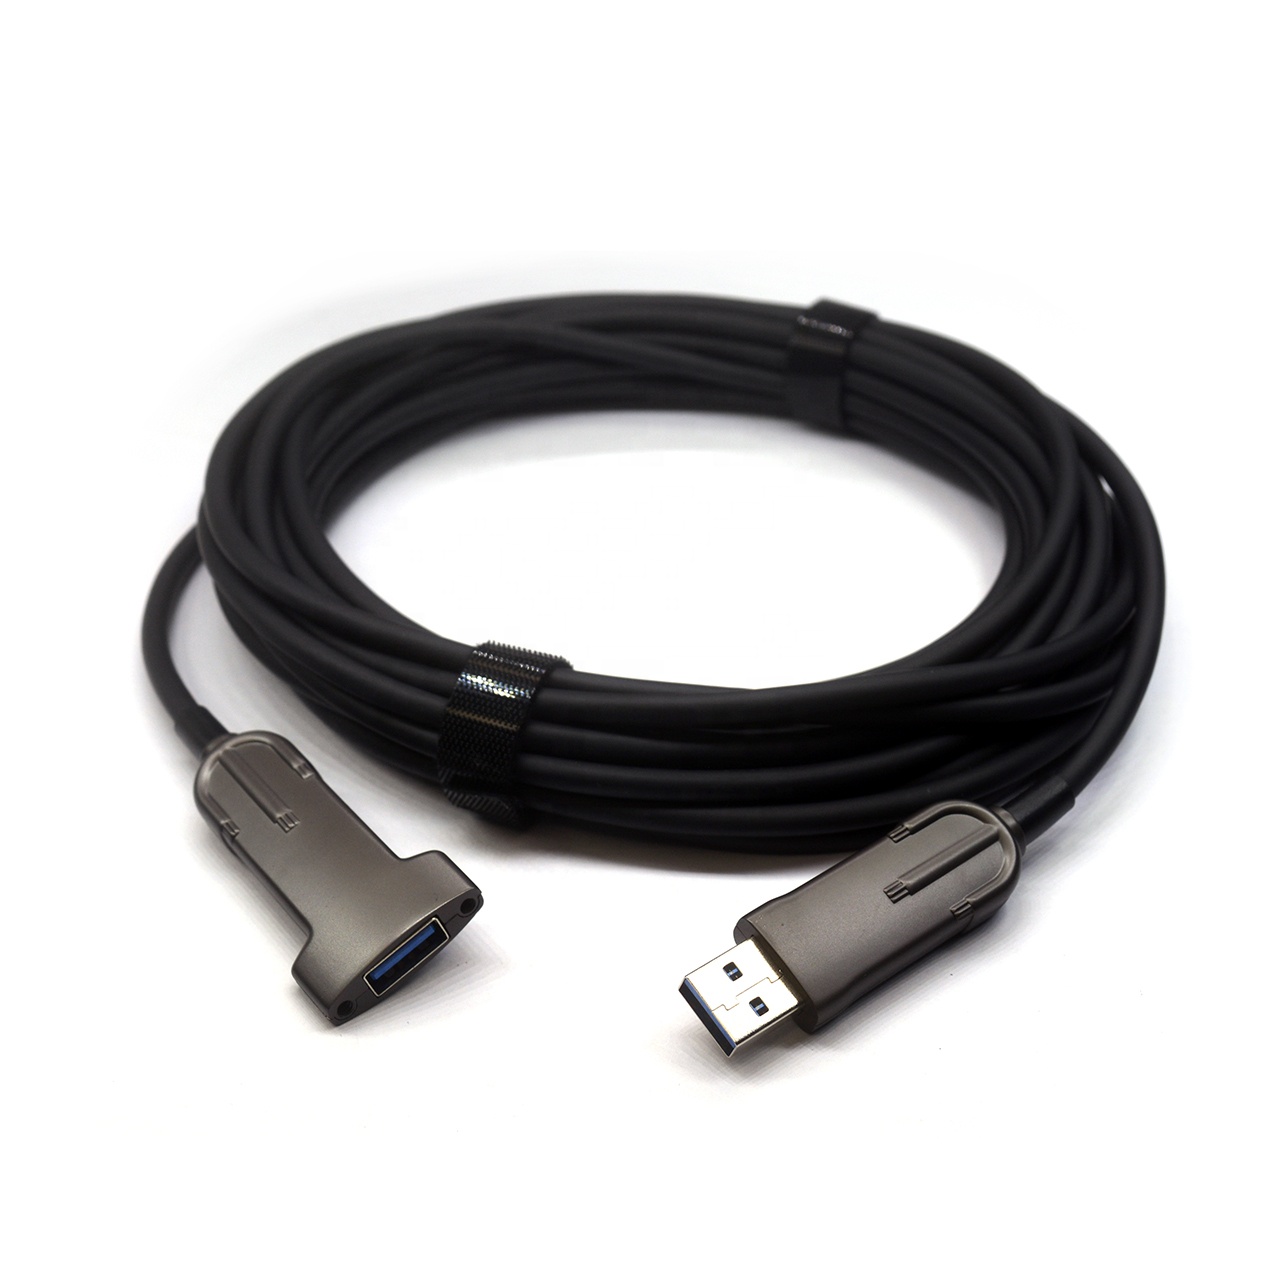 [AOC] USB 3.0 type A male to type A male extra-long usb high flex active optical cable for industrial cameras